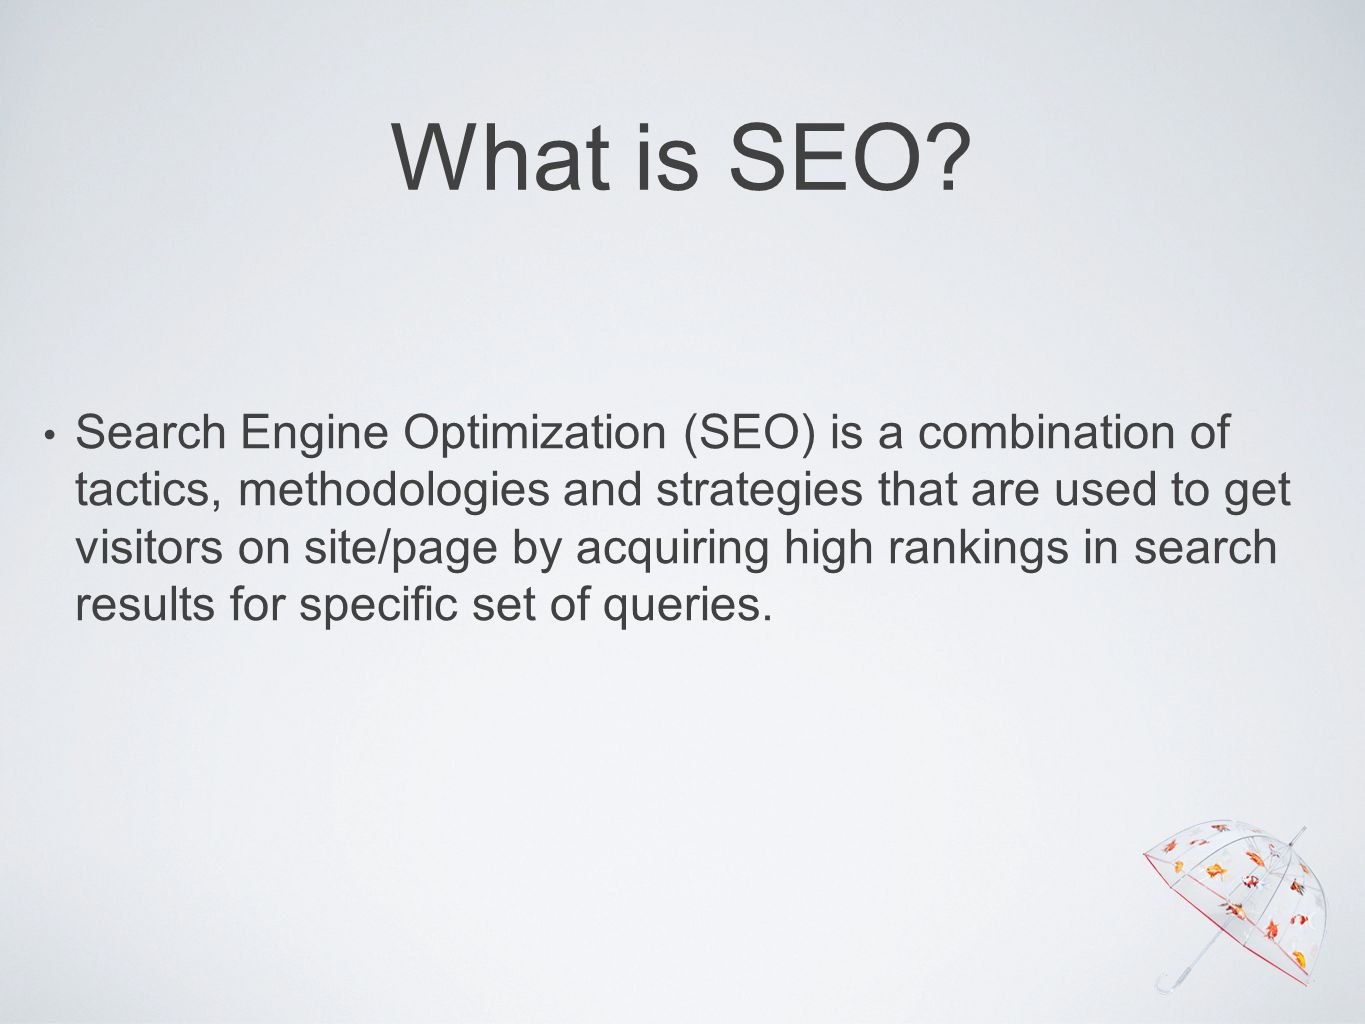 What is SEO.